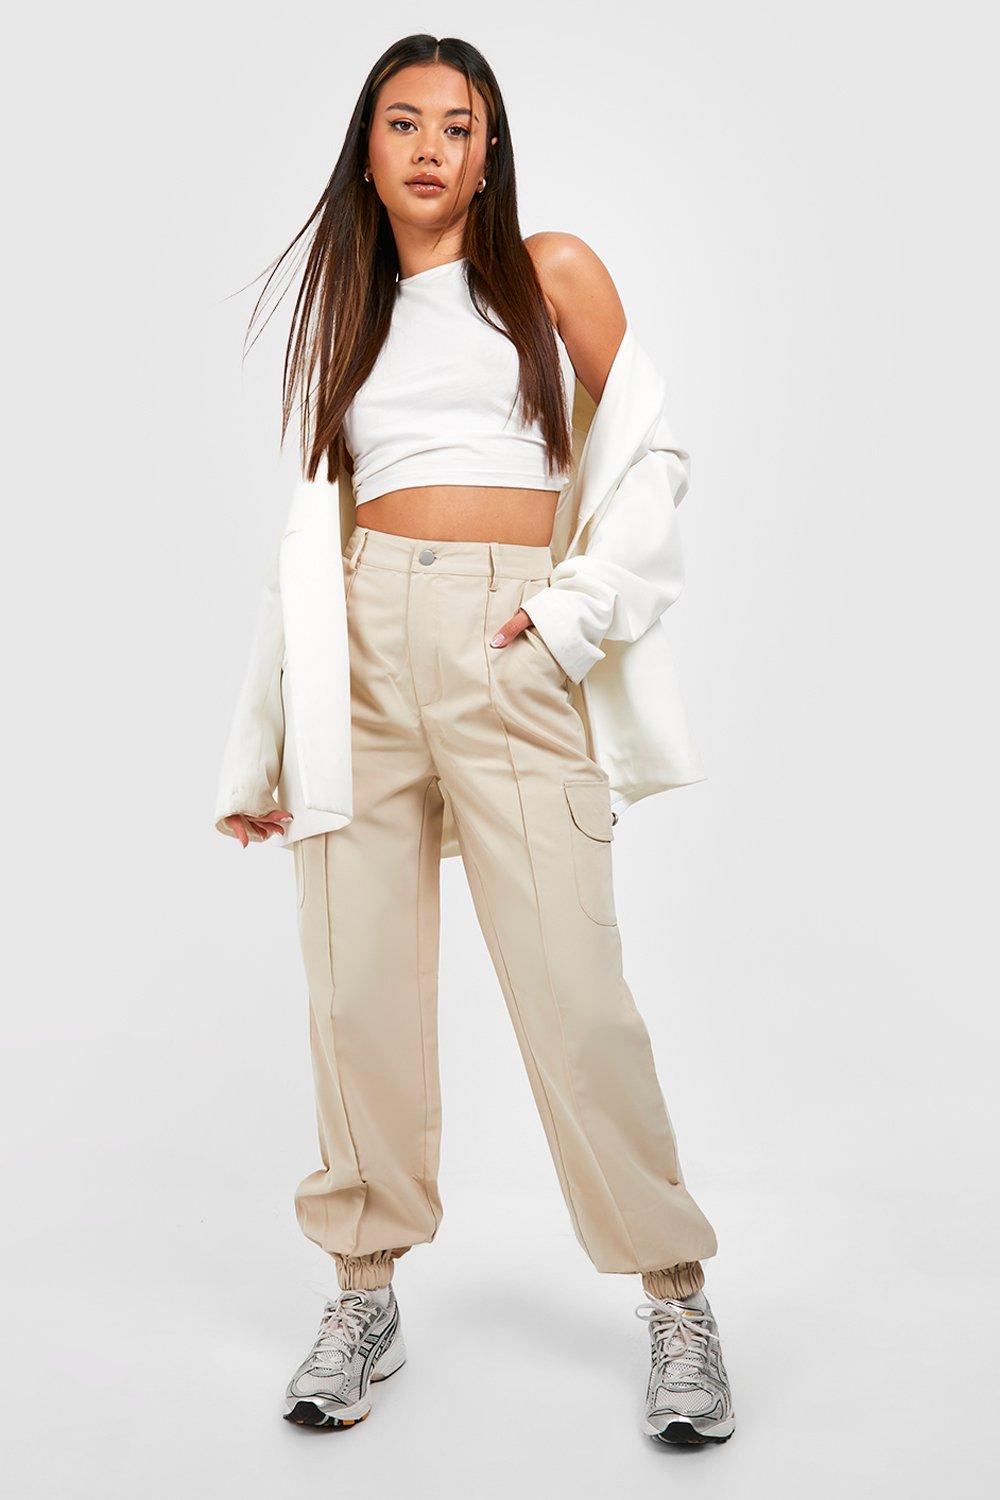 Boohoo Synthetic V Waist Cargo Trousers in Cream Womens Clothing Trousers - Save 18% Slacks and Chinos Cargo trousers Natural 